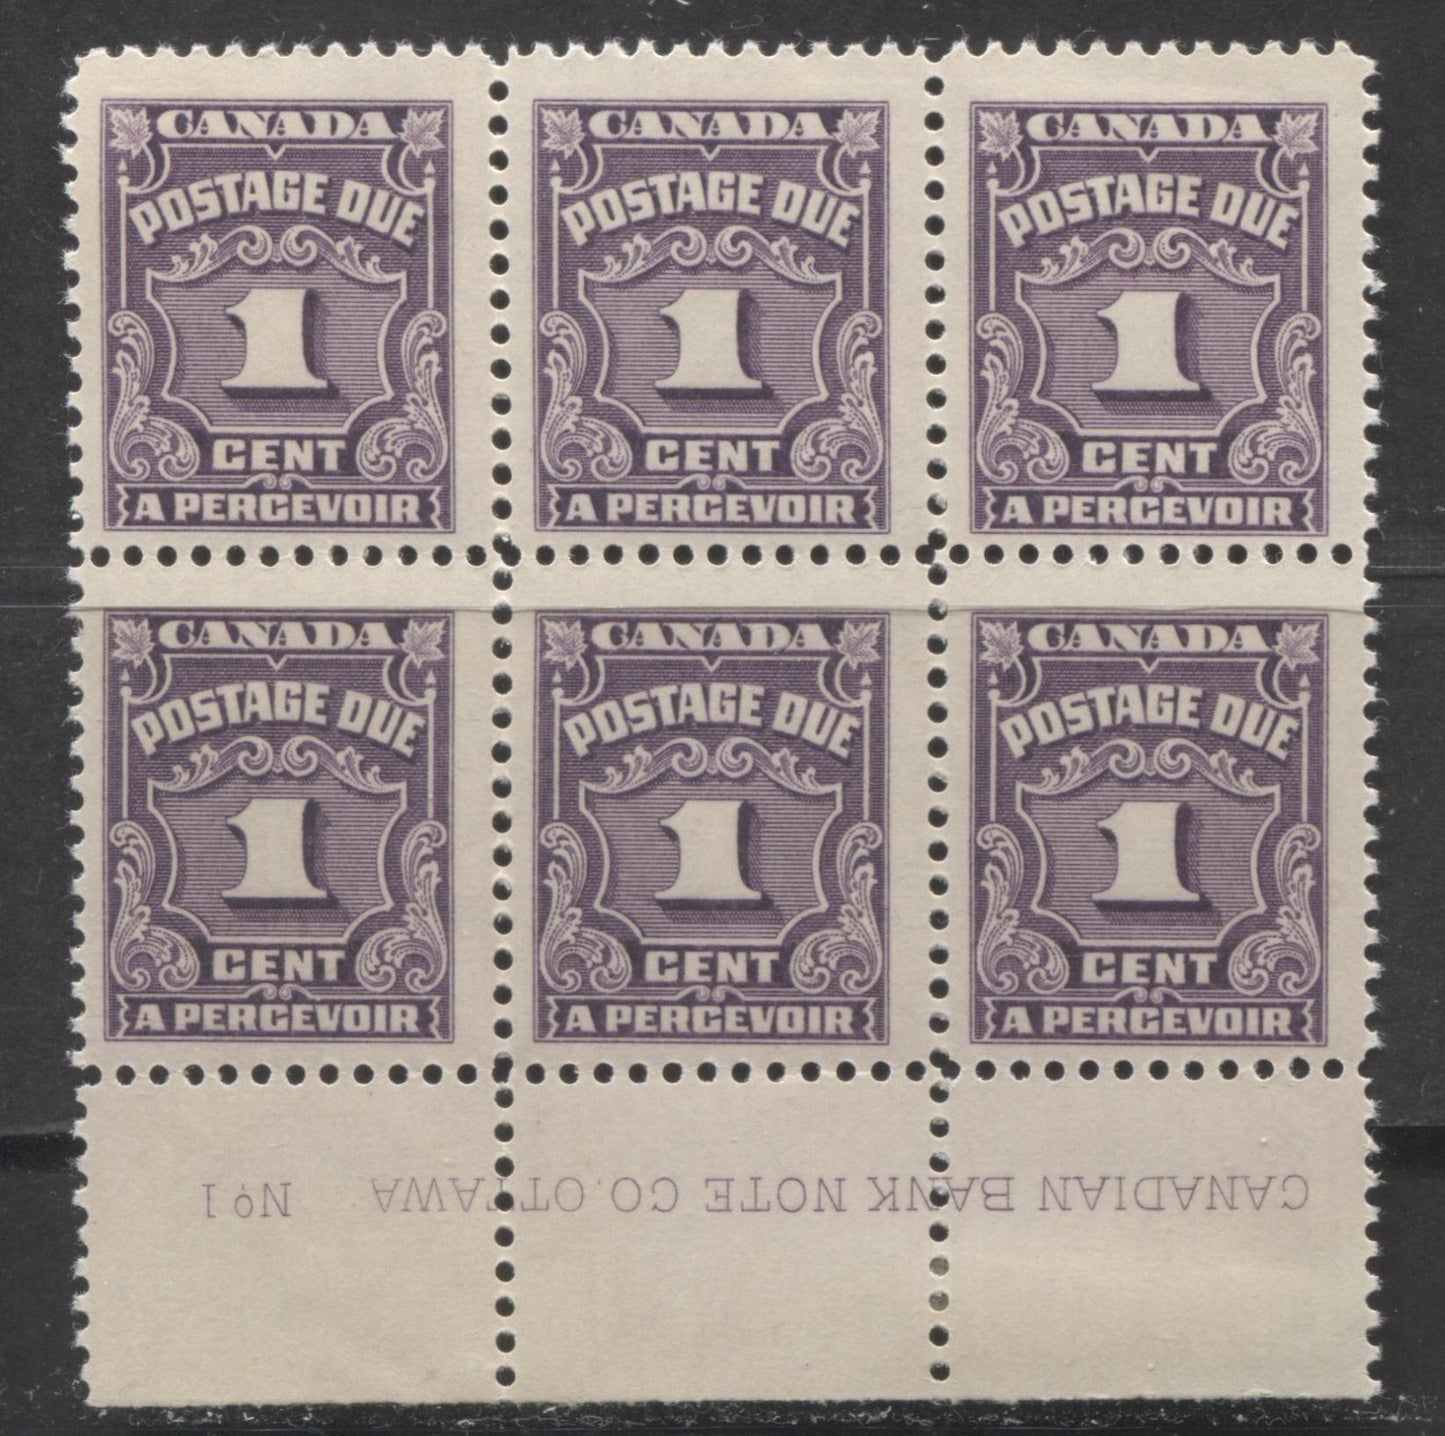 Lot 54 Canada #J15b 1c Reddish Violet, 1935-1965 Fourth Postage Due Issue, A FOG Lower Plate 1 Block Of 6 On Horizontal Ribbed Paper With Semi Glossy Deep Cream Gum. Likely Mufti Period